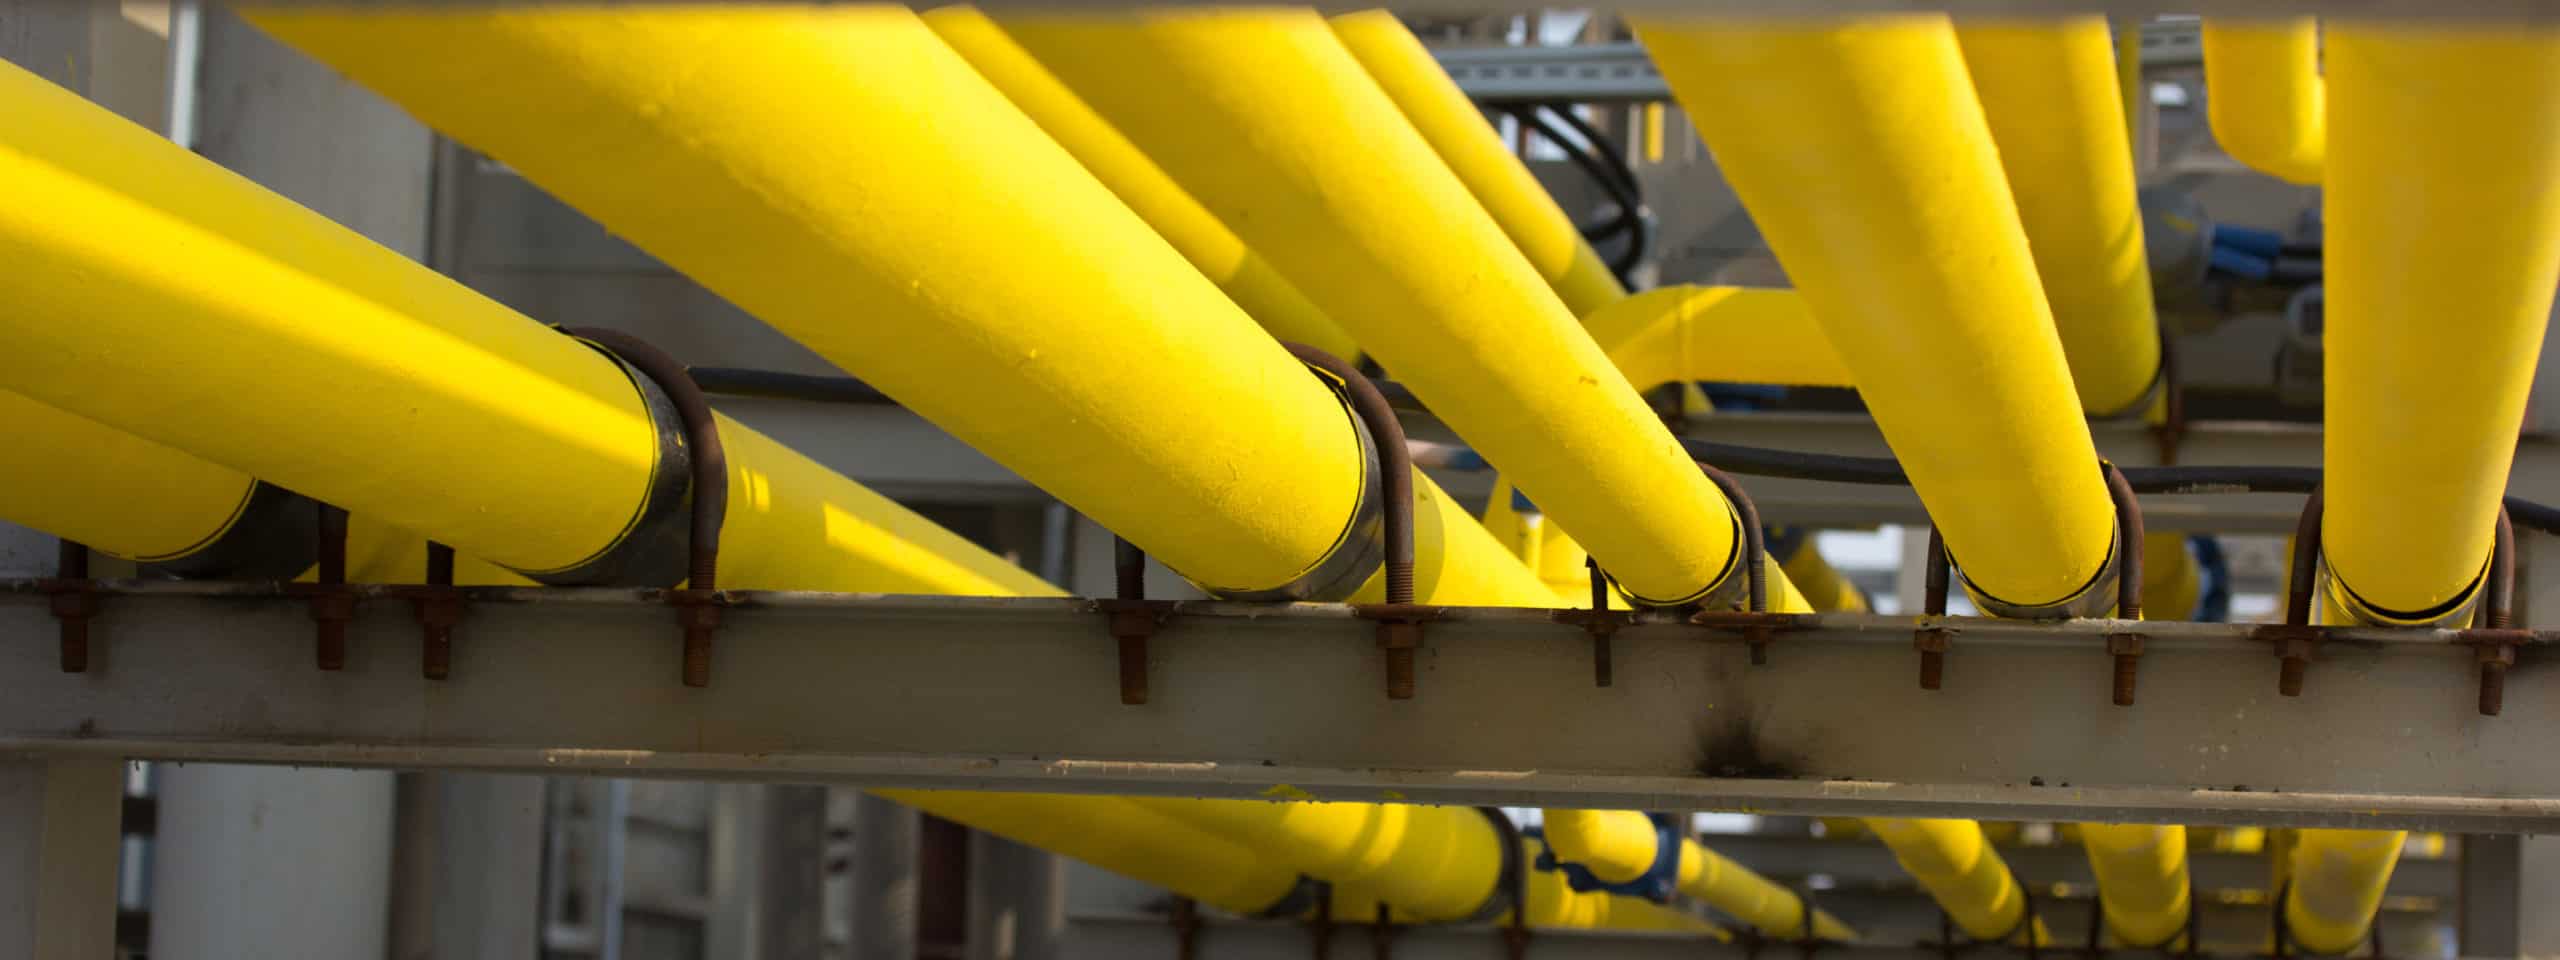 multiple yellow pipelines